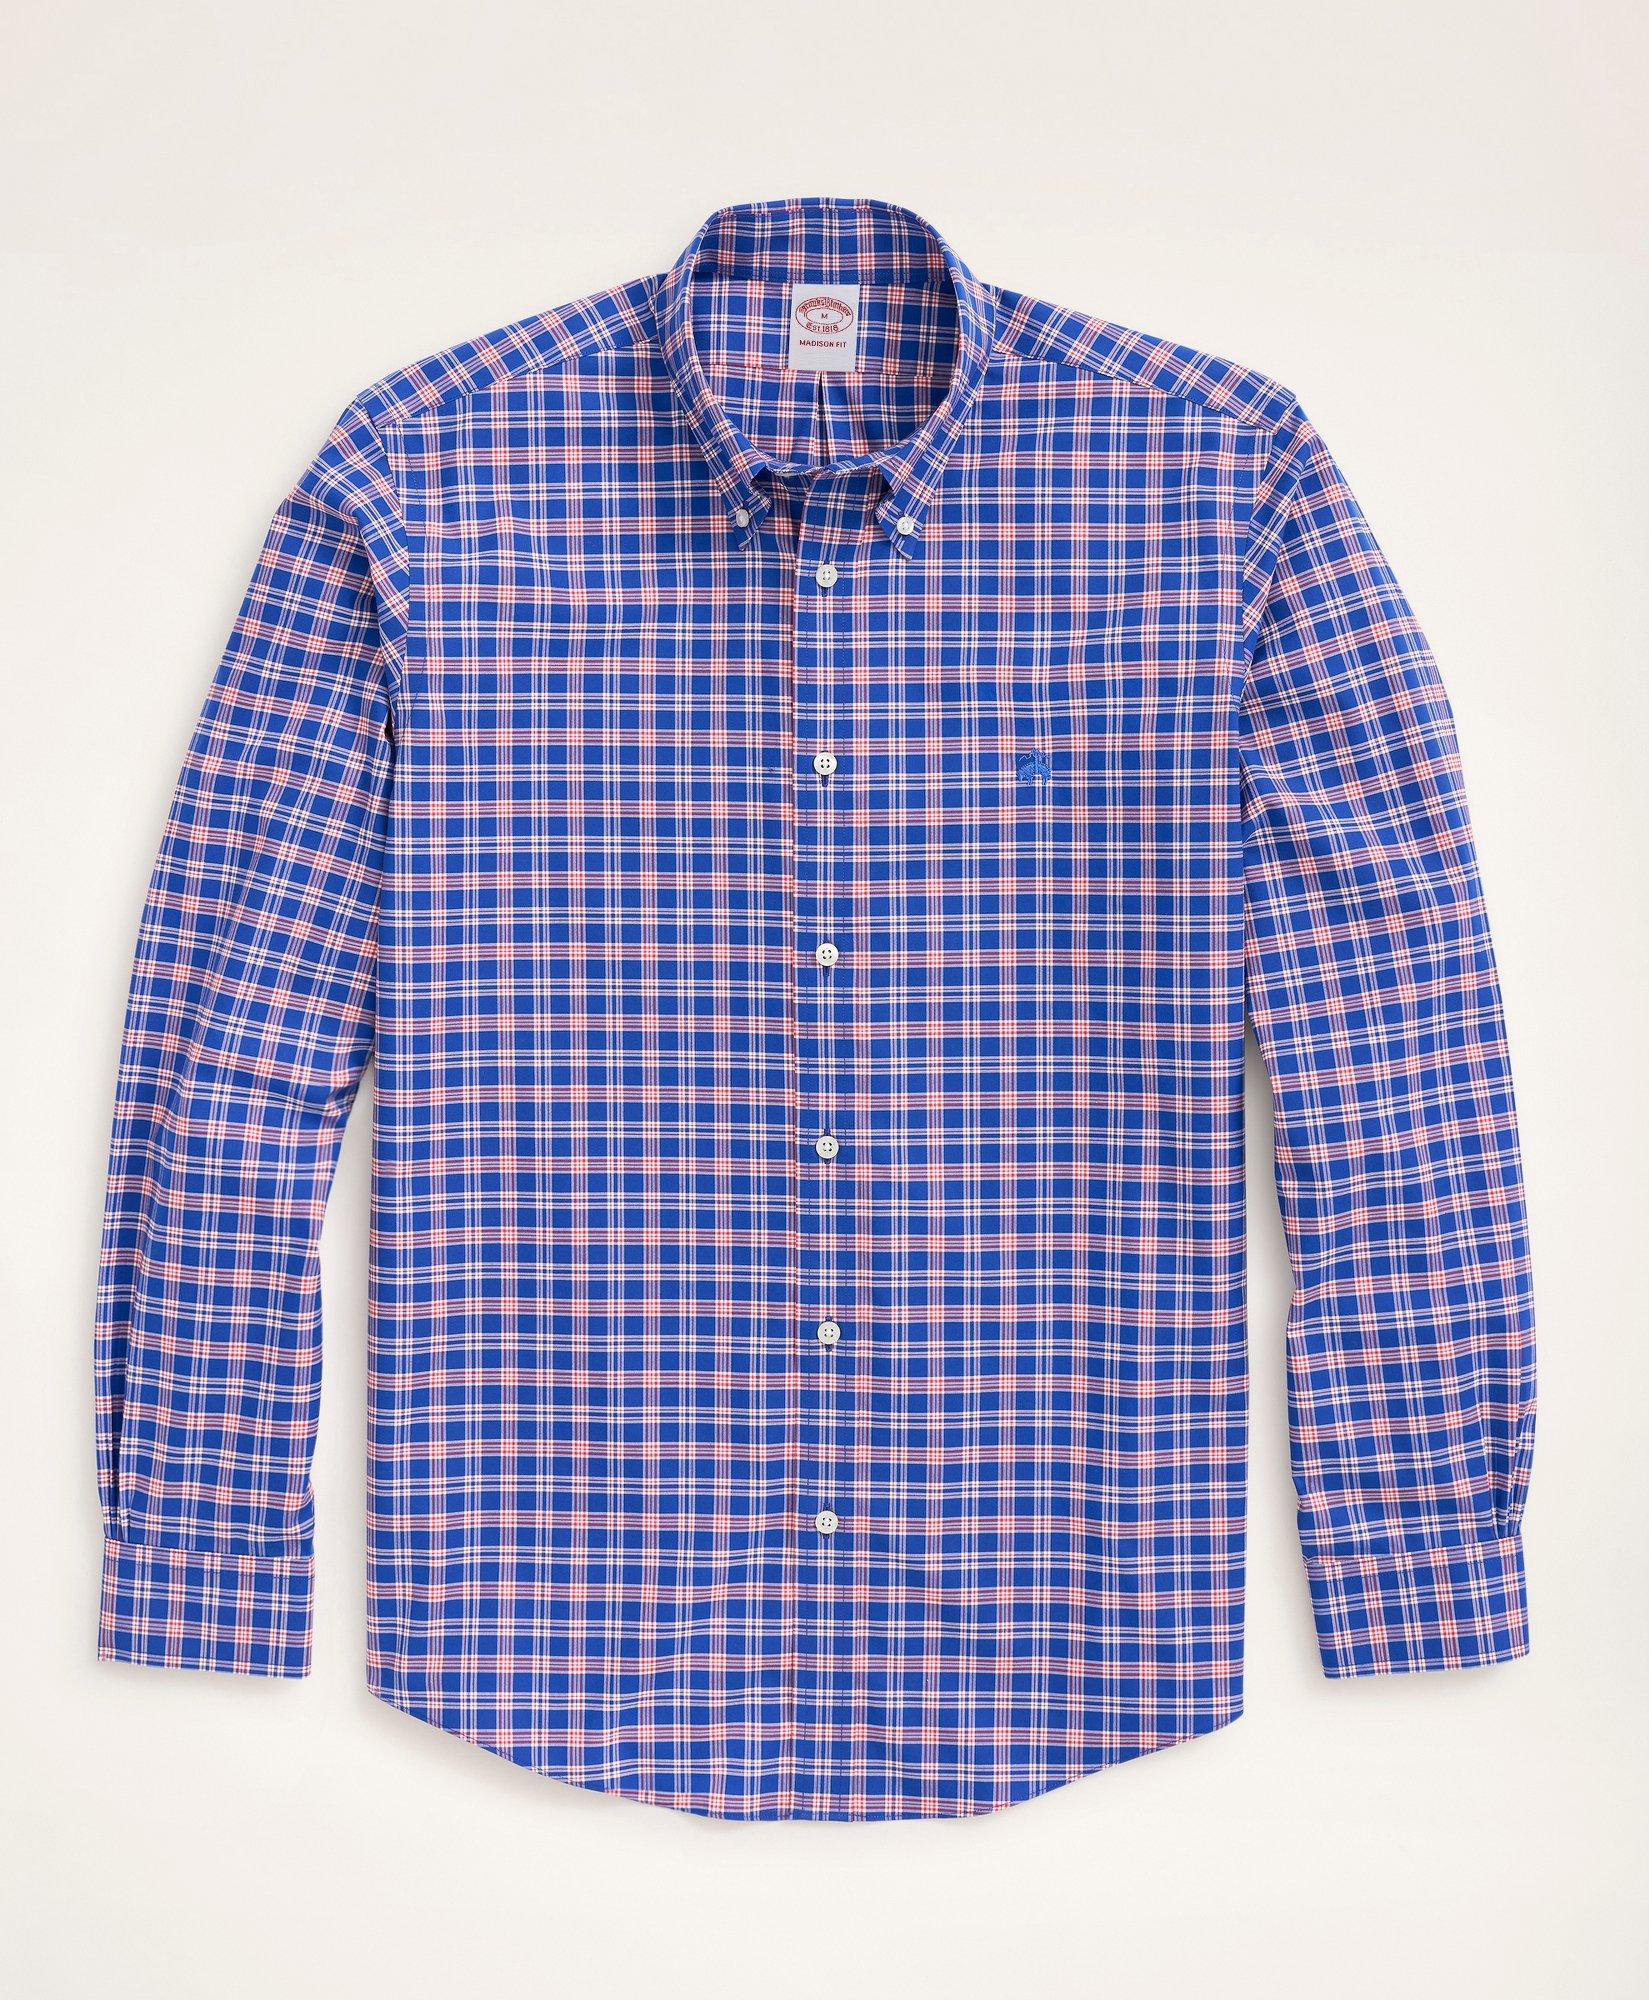 Stretch Madison Relaxed-Fit Sport Shirt, Non-Iron Check, image 1